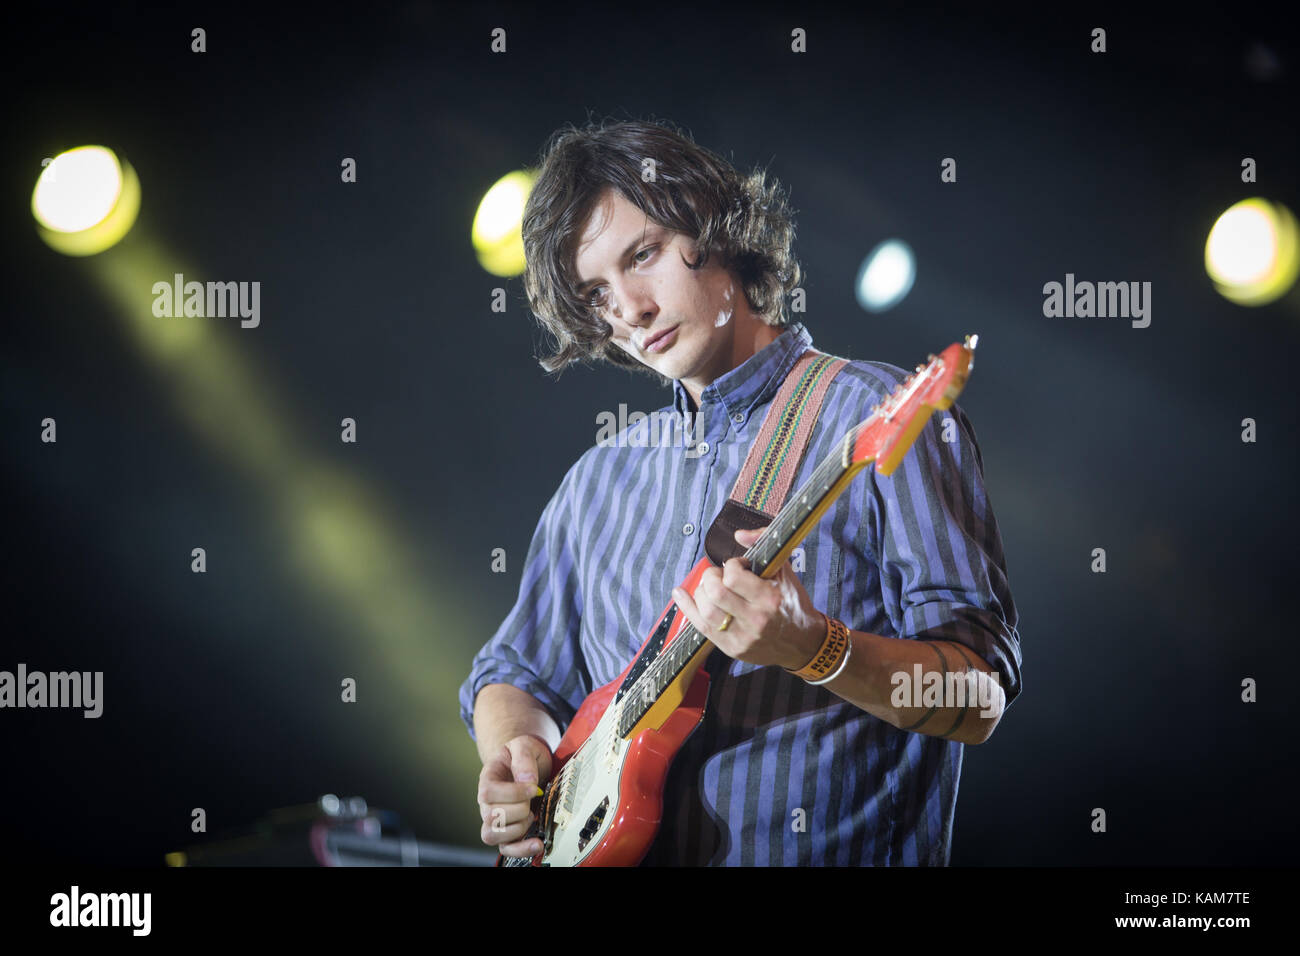 The American indie rock band Deerhunter performs a live concert at the Arena Stage at Roskilde Festival 2014. Here guitarist and musician Lockett Pundt is pictured live on stage. Denmark, 06/07 2014. Stock Photo